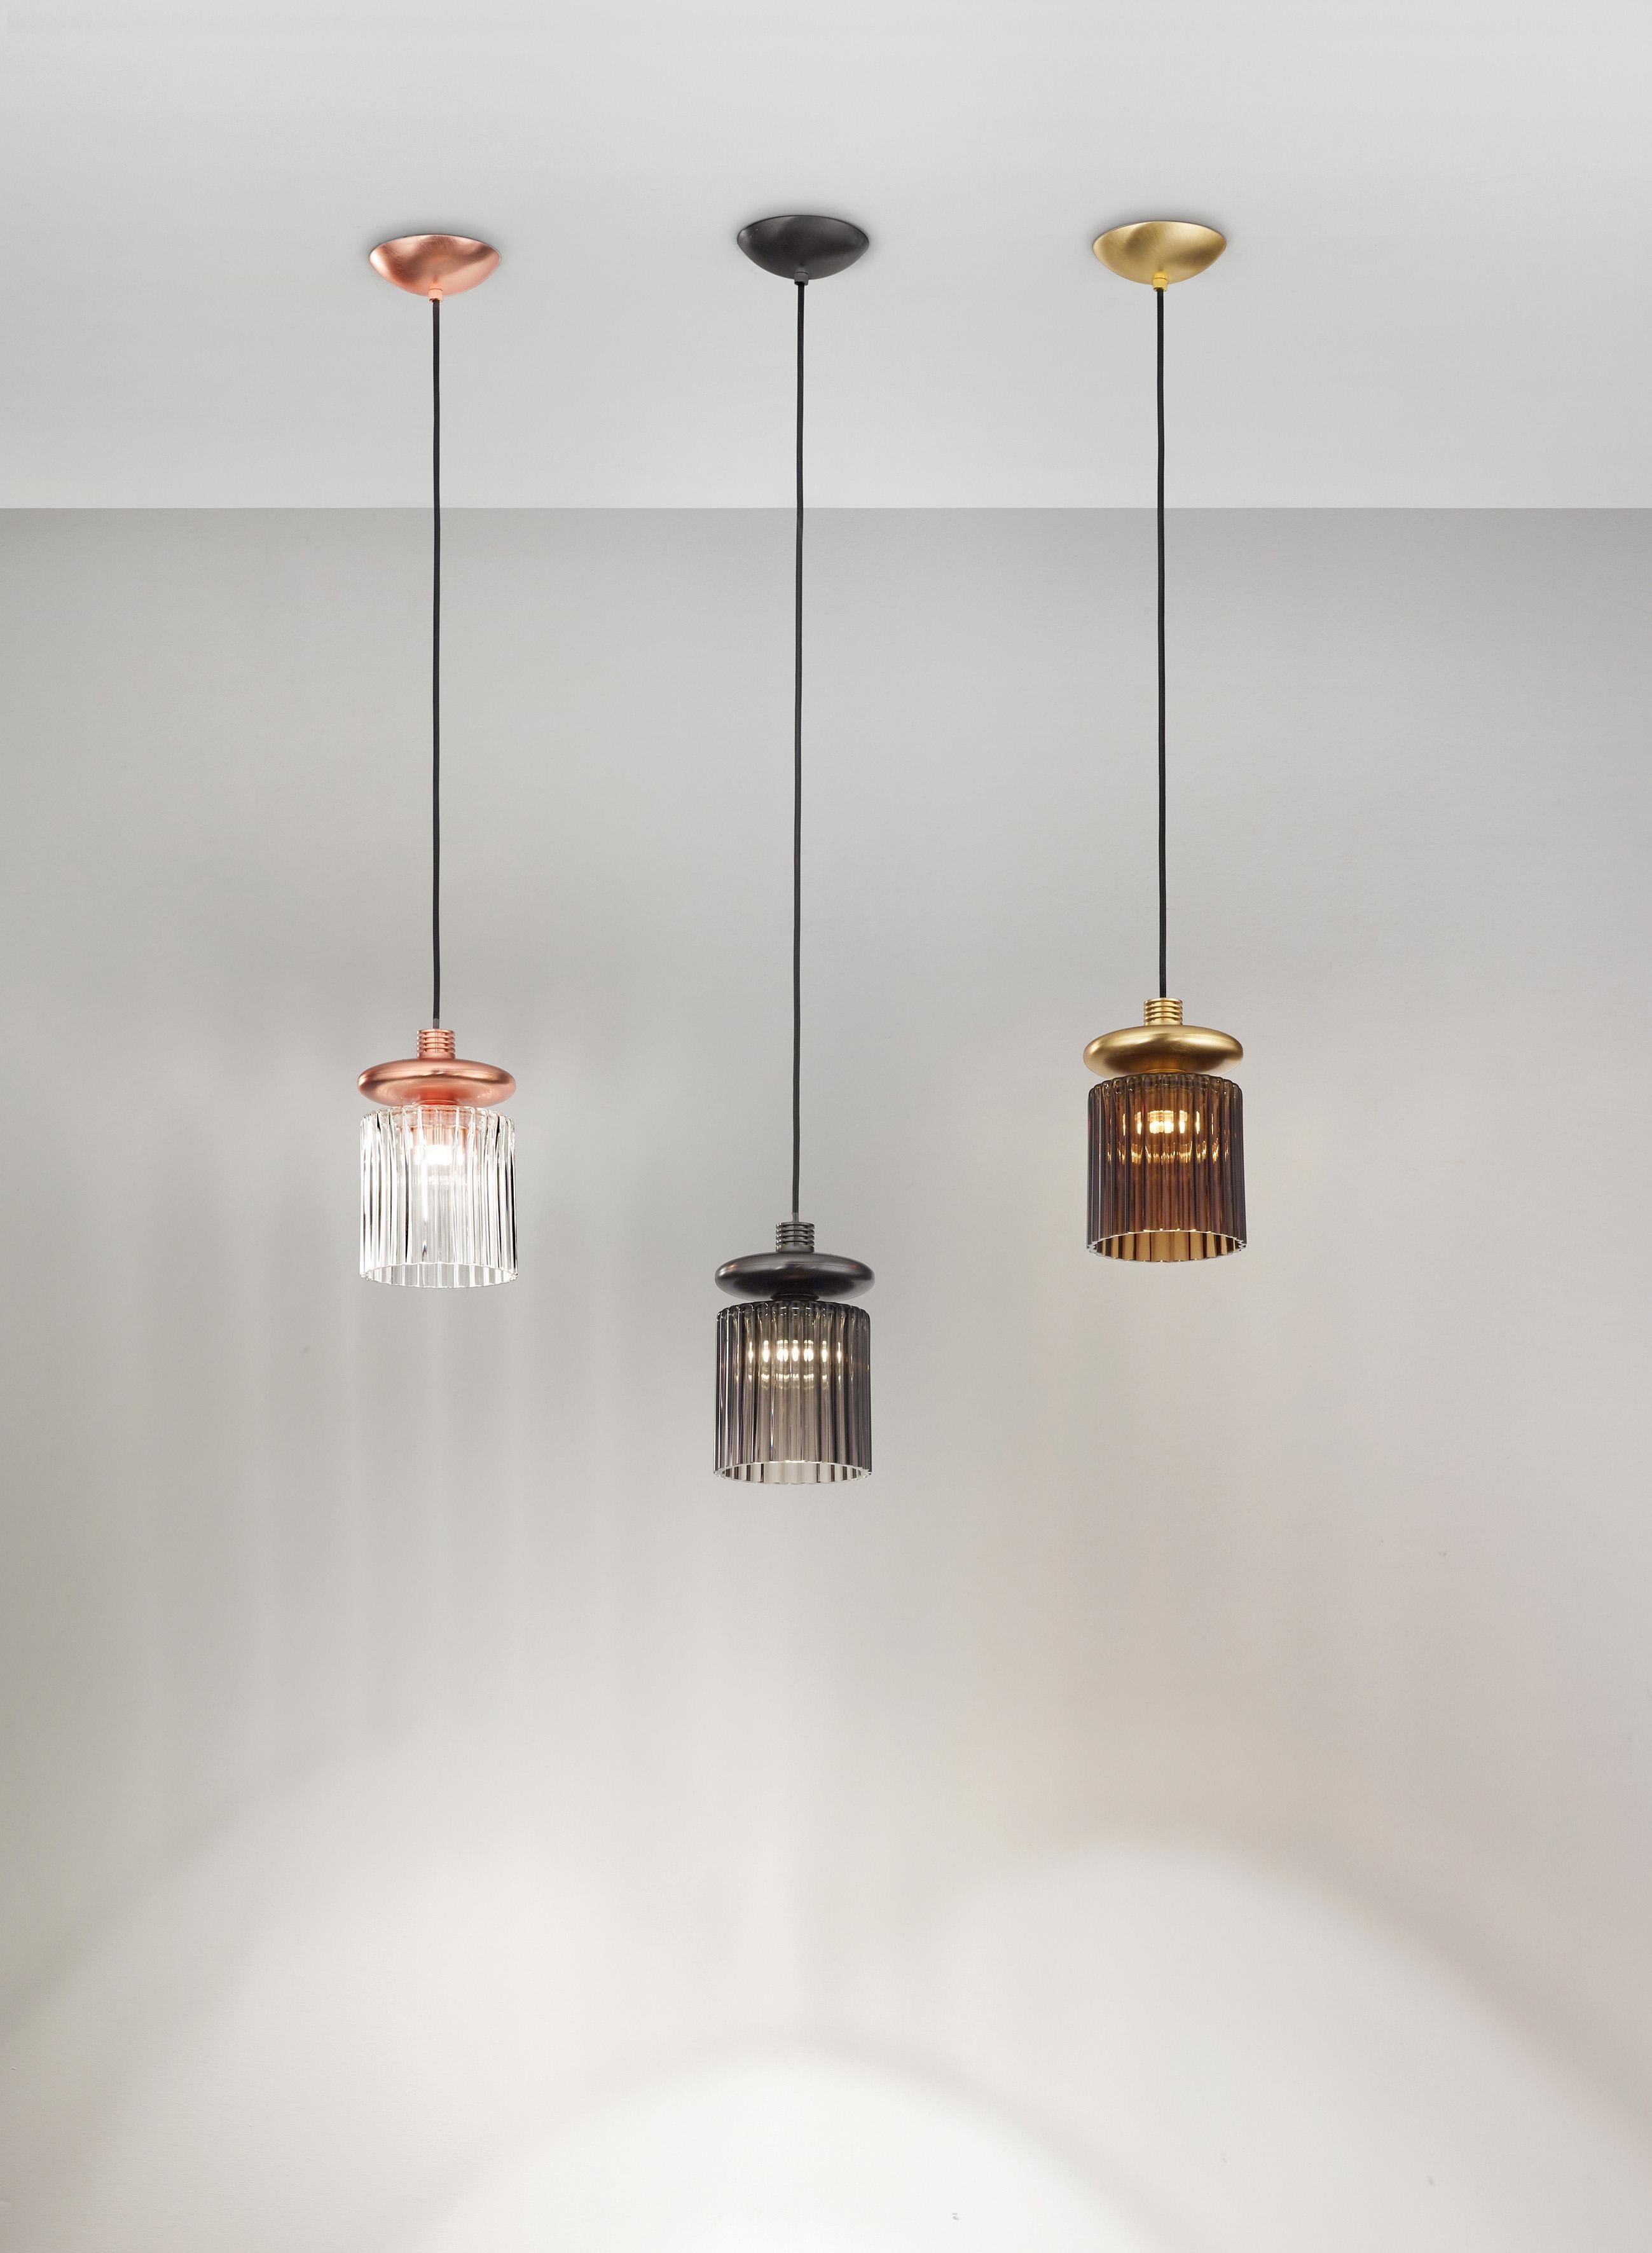 The “technicity” of the metal element combined with the blown glass diffuser gives Tread an “Industrial” style. An object reminiscent of vintage electrical equipment for its particular shape, in which the finned heat sink, combined with blown glass,